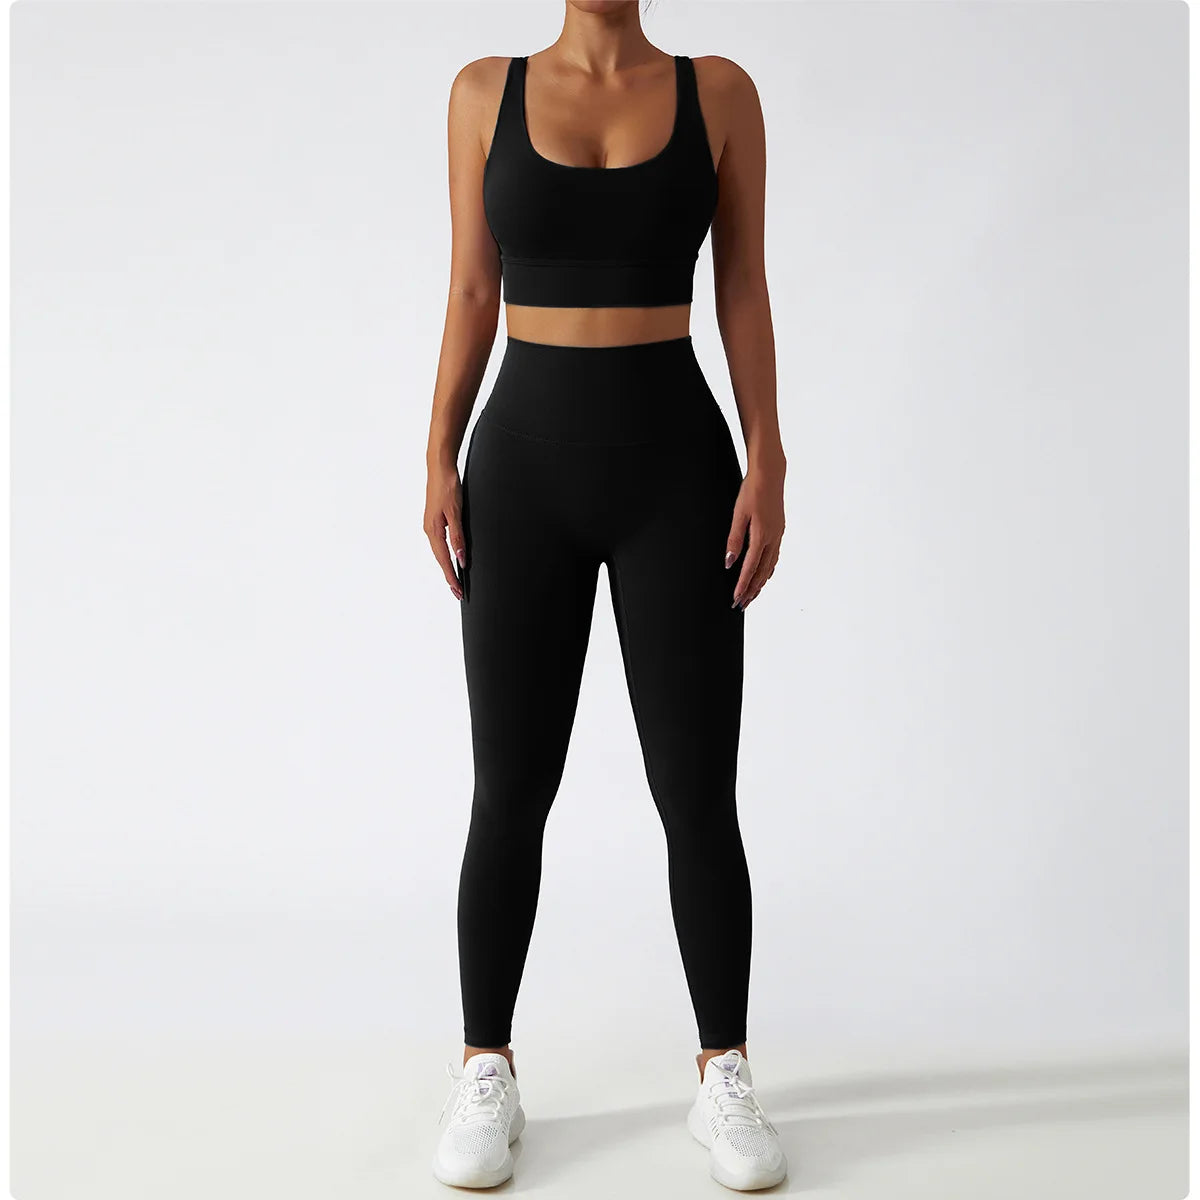 Women's Sports Set Yoga Clothing Gym High Waist Running Pants Sport Bra Suit for Fitness Sportswear Workout 2 Piece Matching Set The Clothing Company Sydney